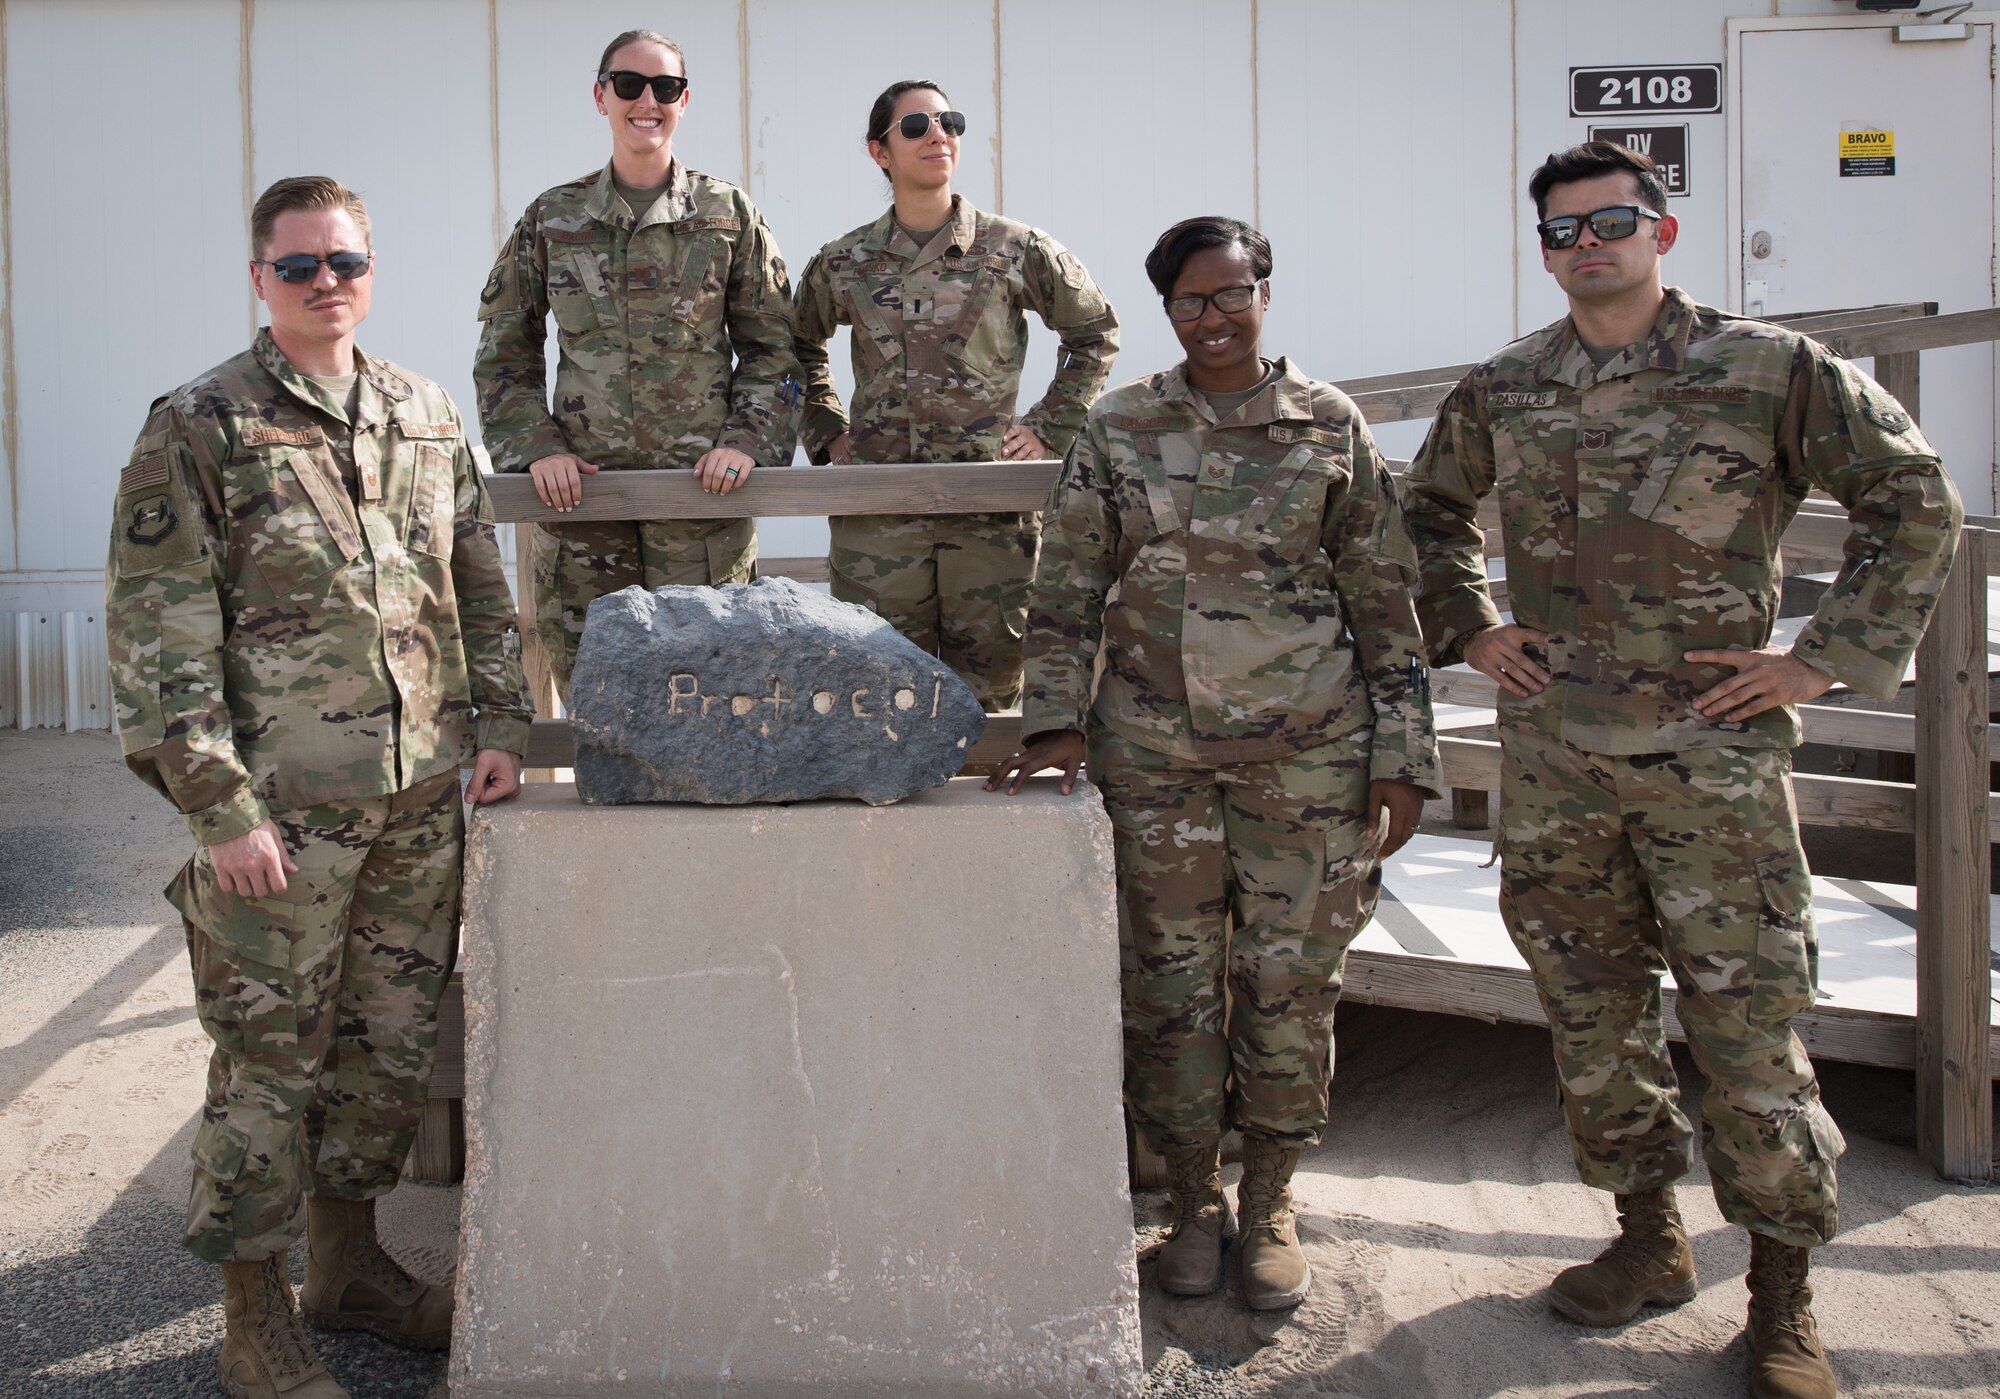 The 386th Air Expeditionary Wing protocol team poses for a photo outside their office at Ali al Salem Air Base, Kuwait, Aug. 15, 2019. Left to Right: Tech. Sgt. Tyler Shepherd, NCO-in-charge of protocol, deployed from Moody Air Force Base, Georgia; Capt. Rosa-Mae Bacon, chief of protocol, deployed from Davis-Monthan AFB, Arizona; 1st Lt. Kassandra Prusko, deputy chief of protocol, deployed from Andrews AFB, Maryland; Staff Sgt. Courtney Lansden, protocol specialist, deployed from Offutt AFB, Nebraska; and Tech. Sgt. Diego Casillas, superintendent of protocol; deployed from Los Angeles AFB, California. (U.S. Air Force photo by Tech. Sgt. Daniel Martinez)